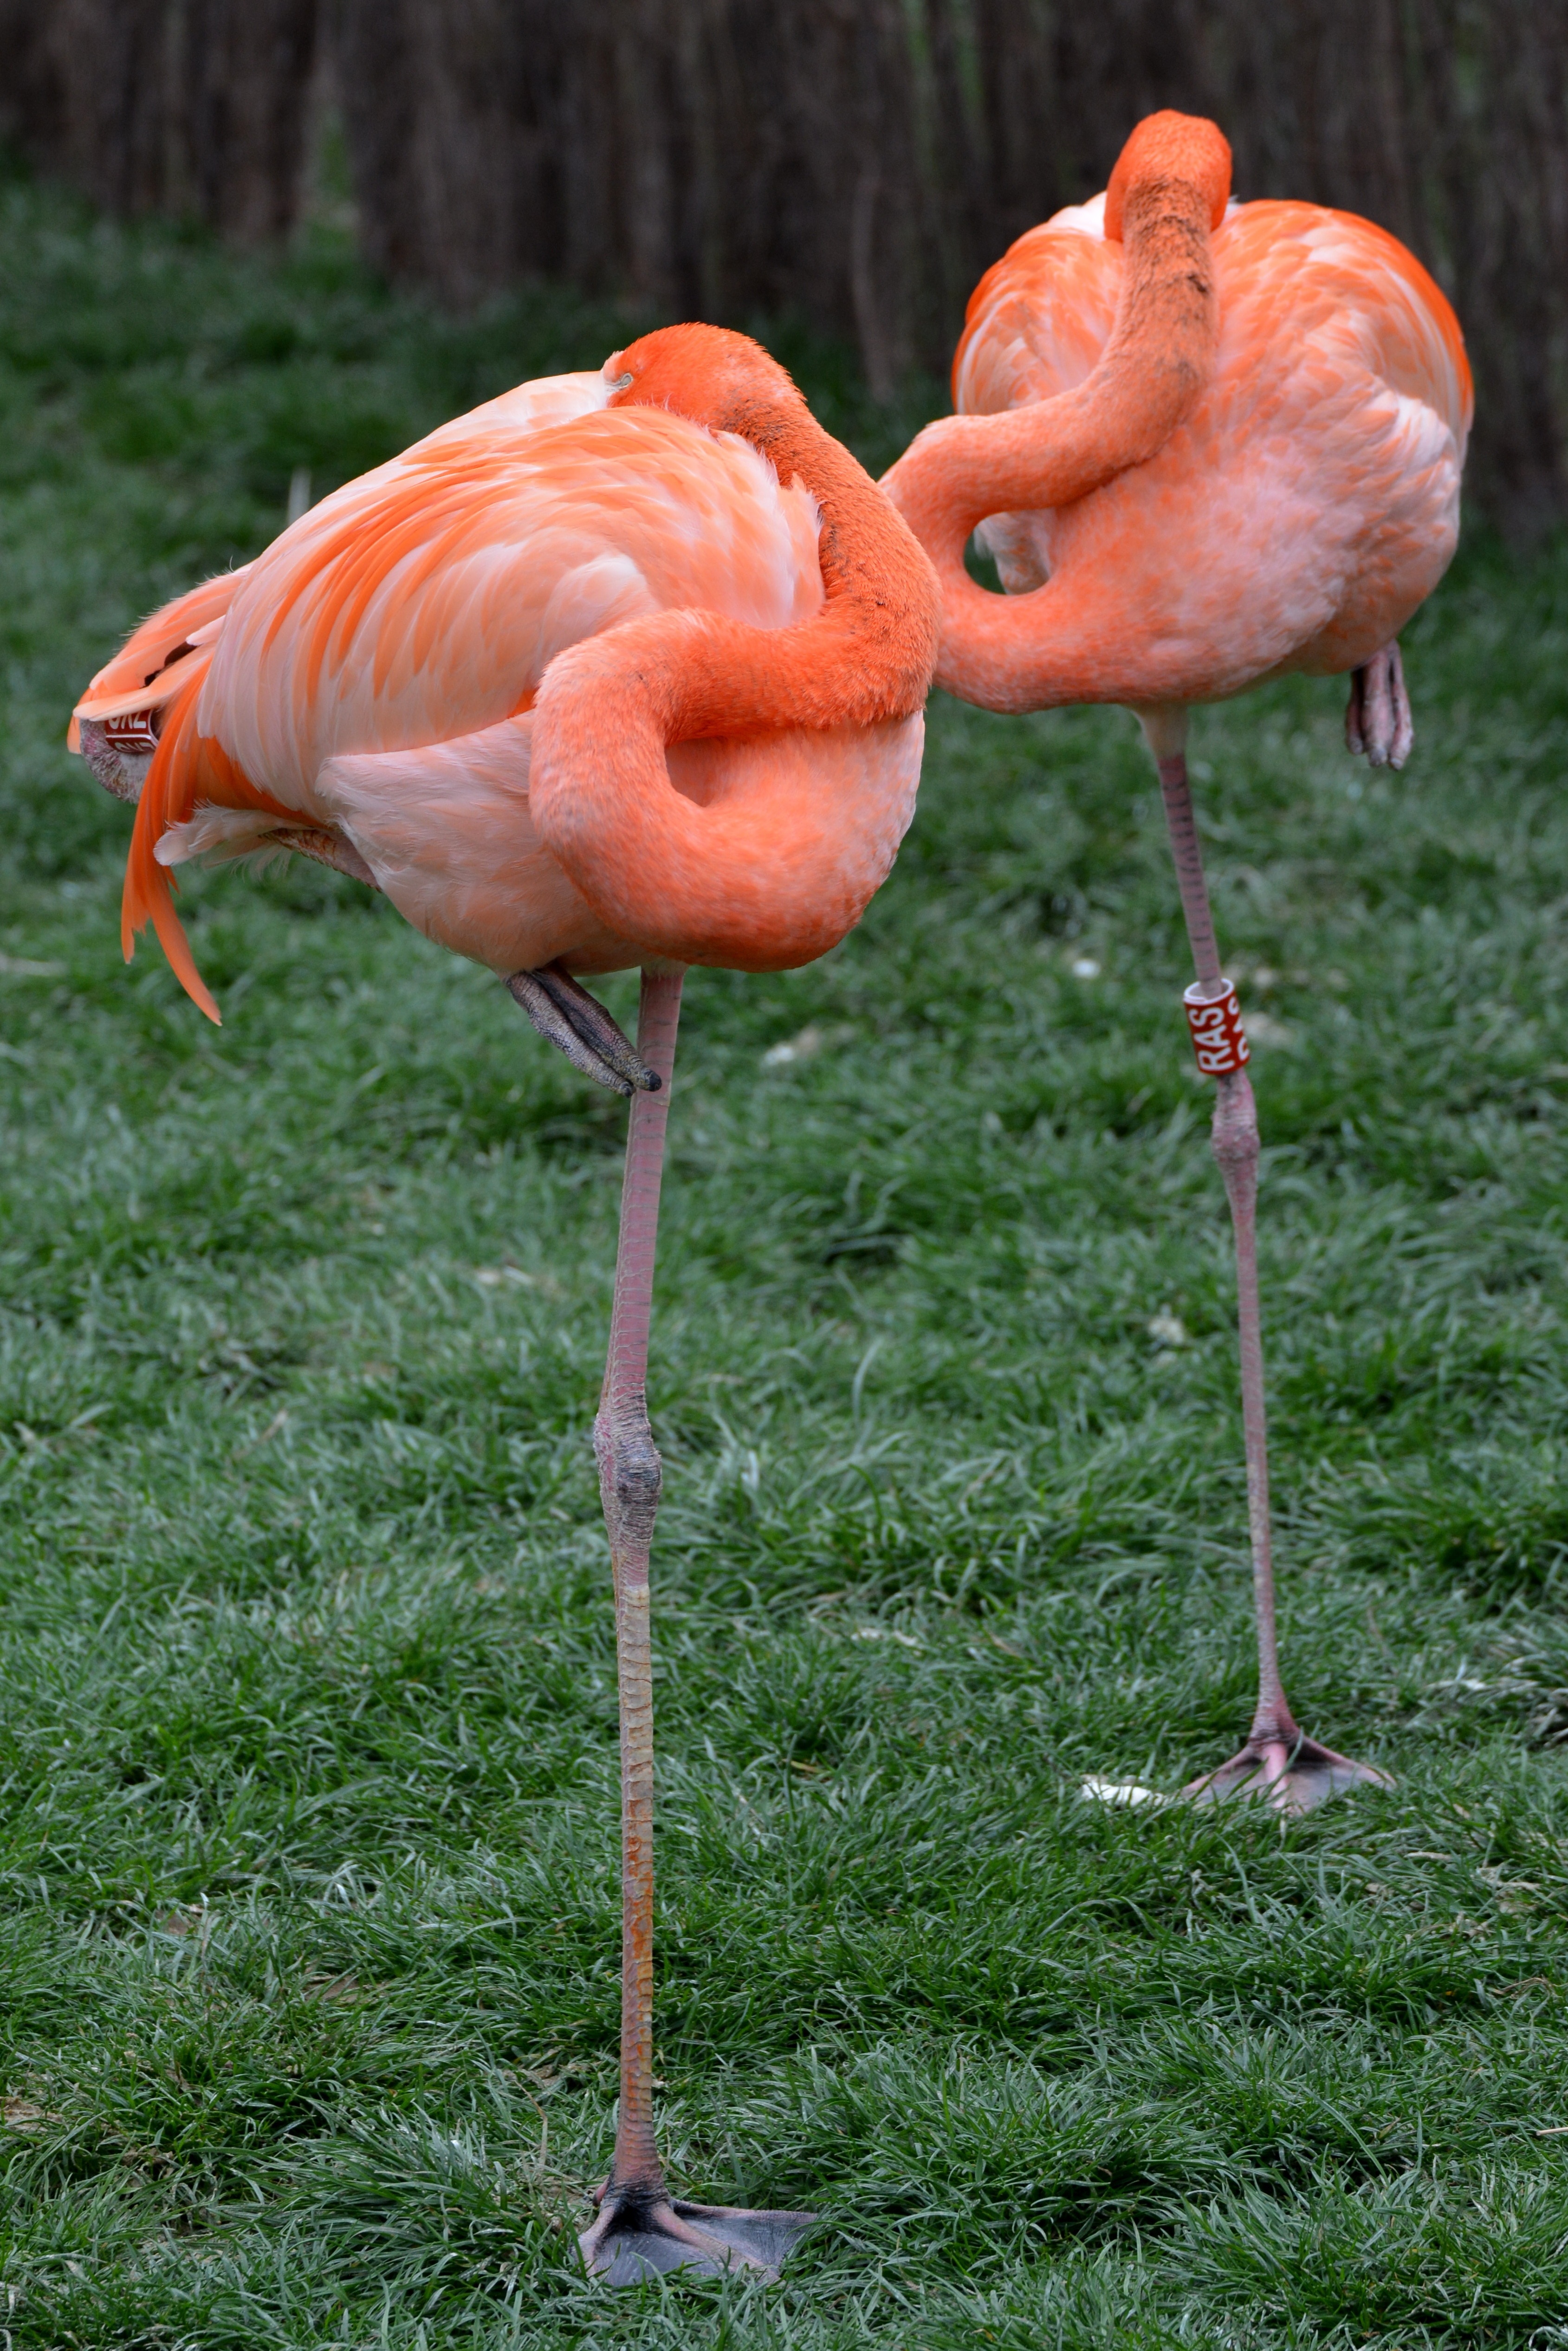 two orange-and-pink flamingo standing on grass field during daytime